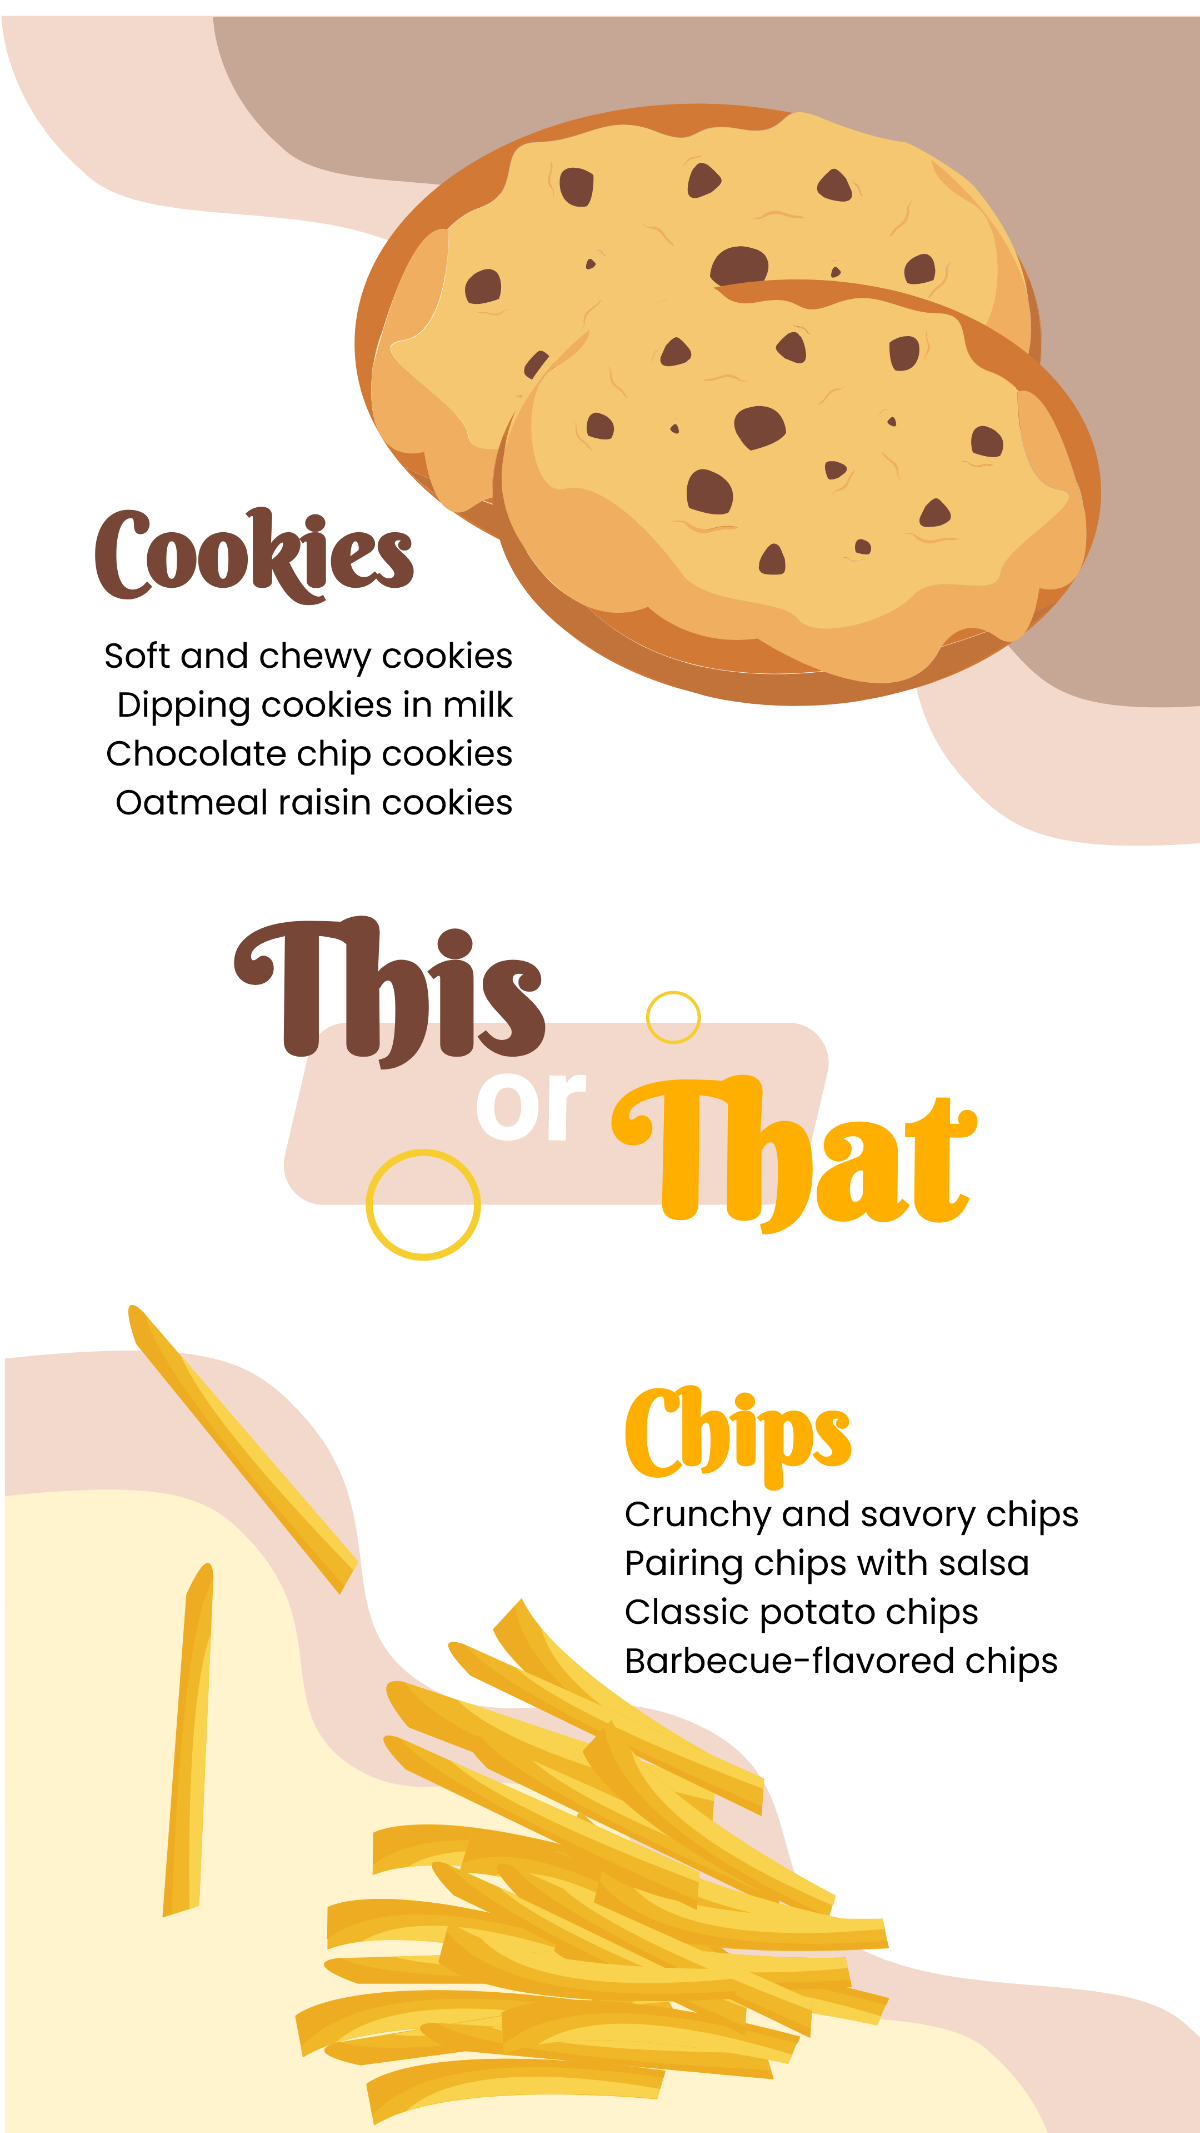 Free Cookies or Chips This or That Instagram Story Template